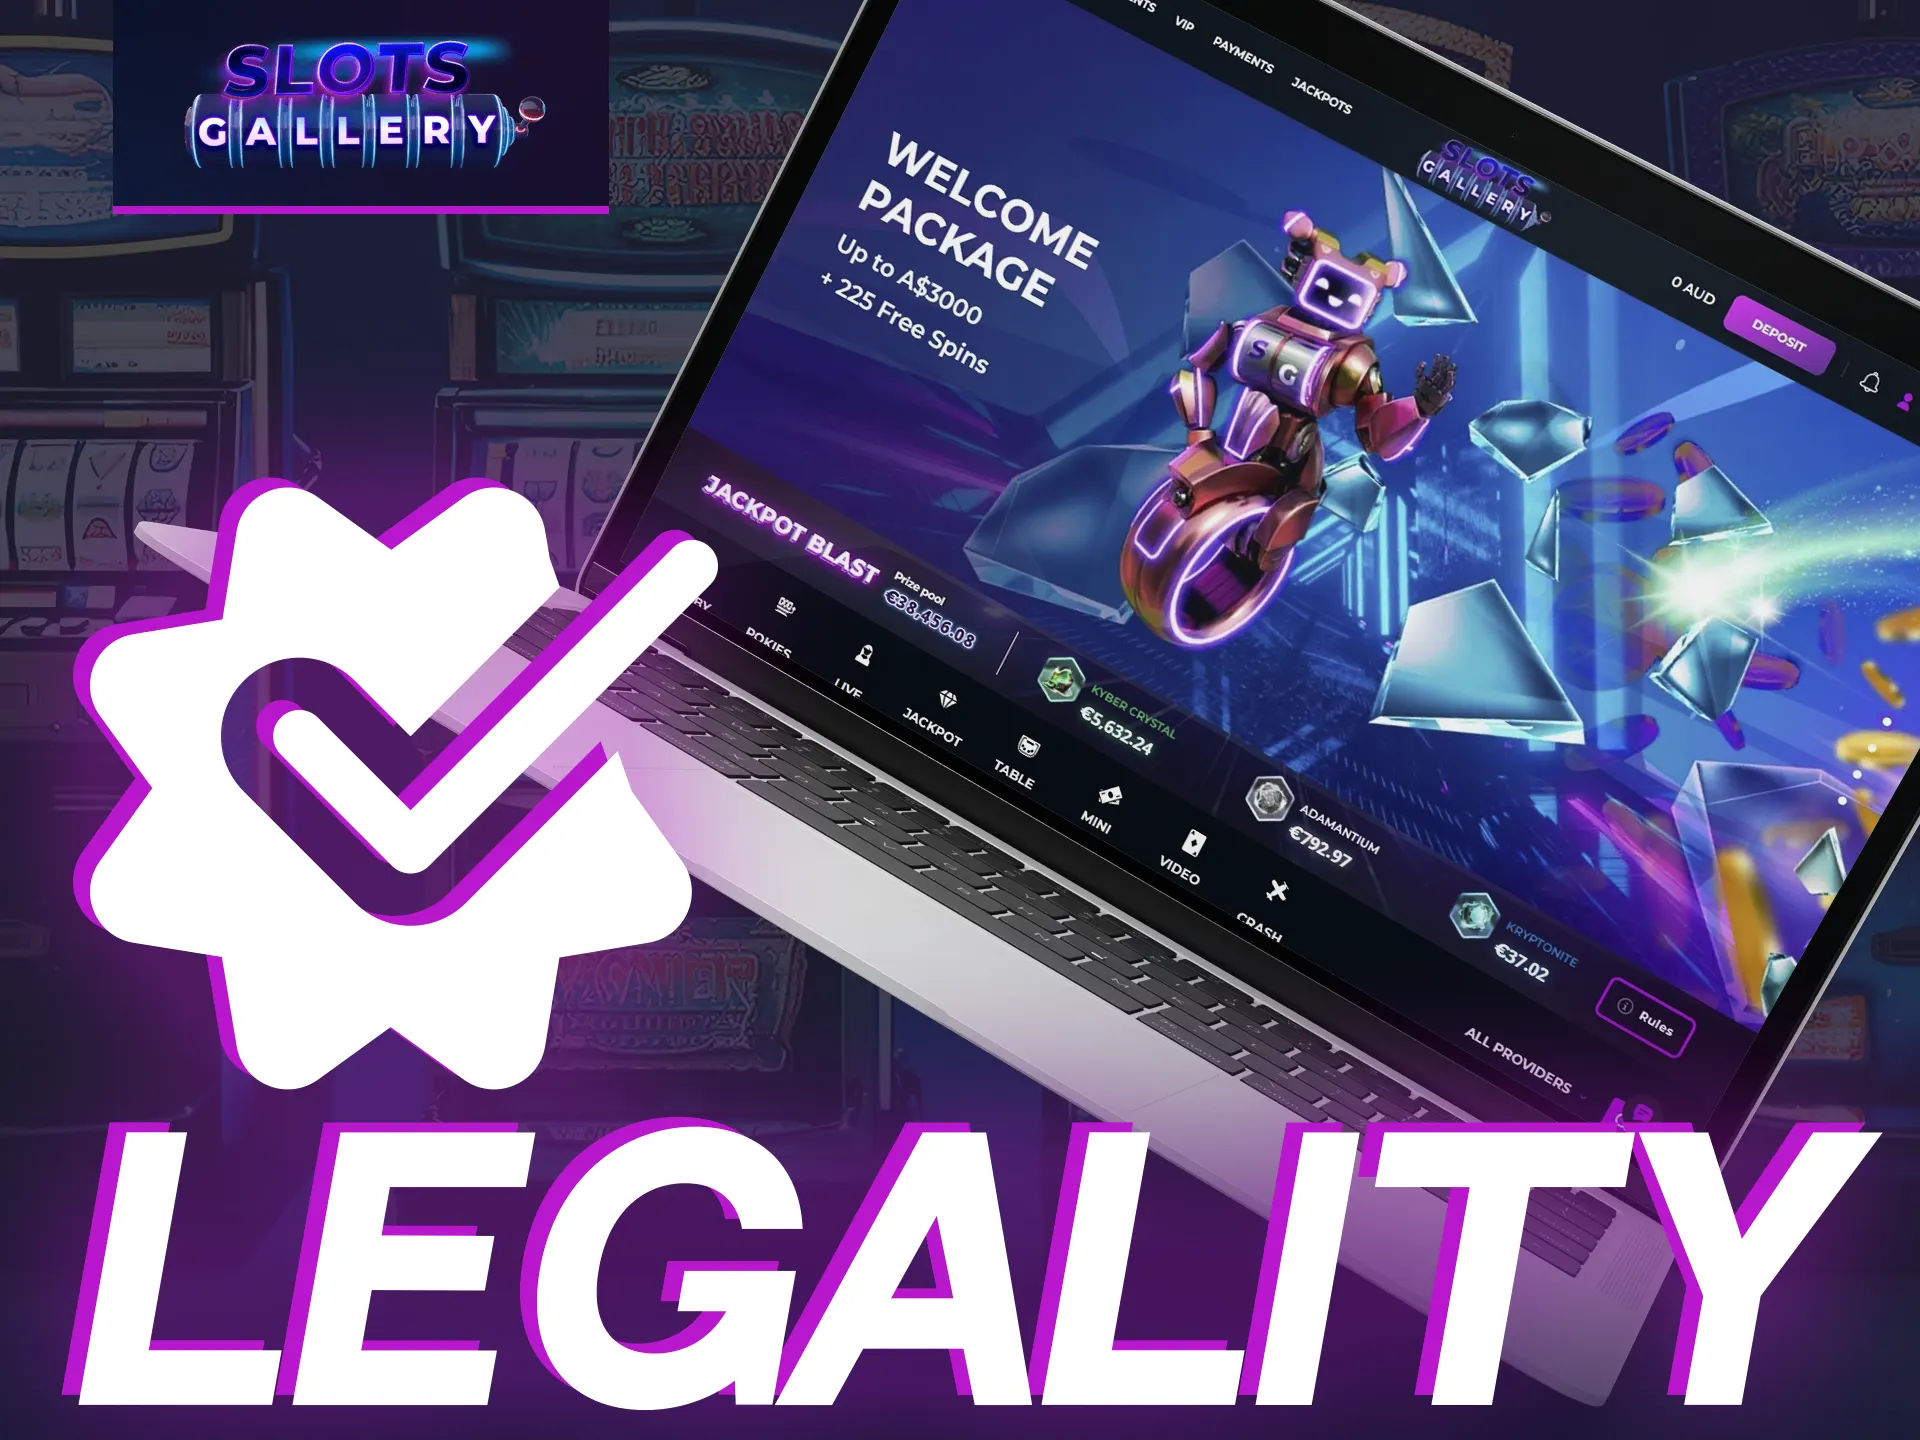 Get more info about the legality of Slots Gallery online casino.